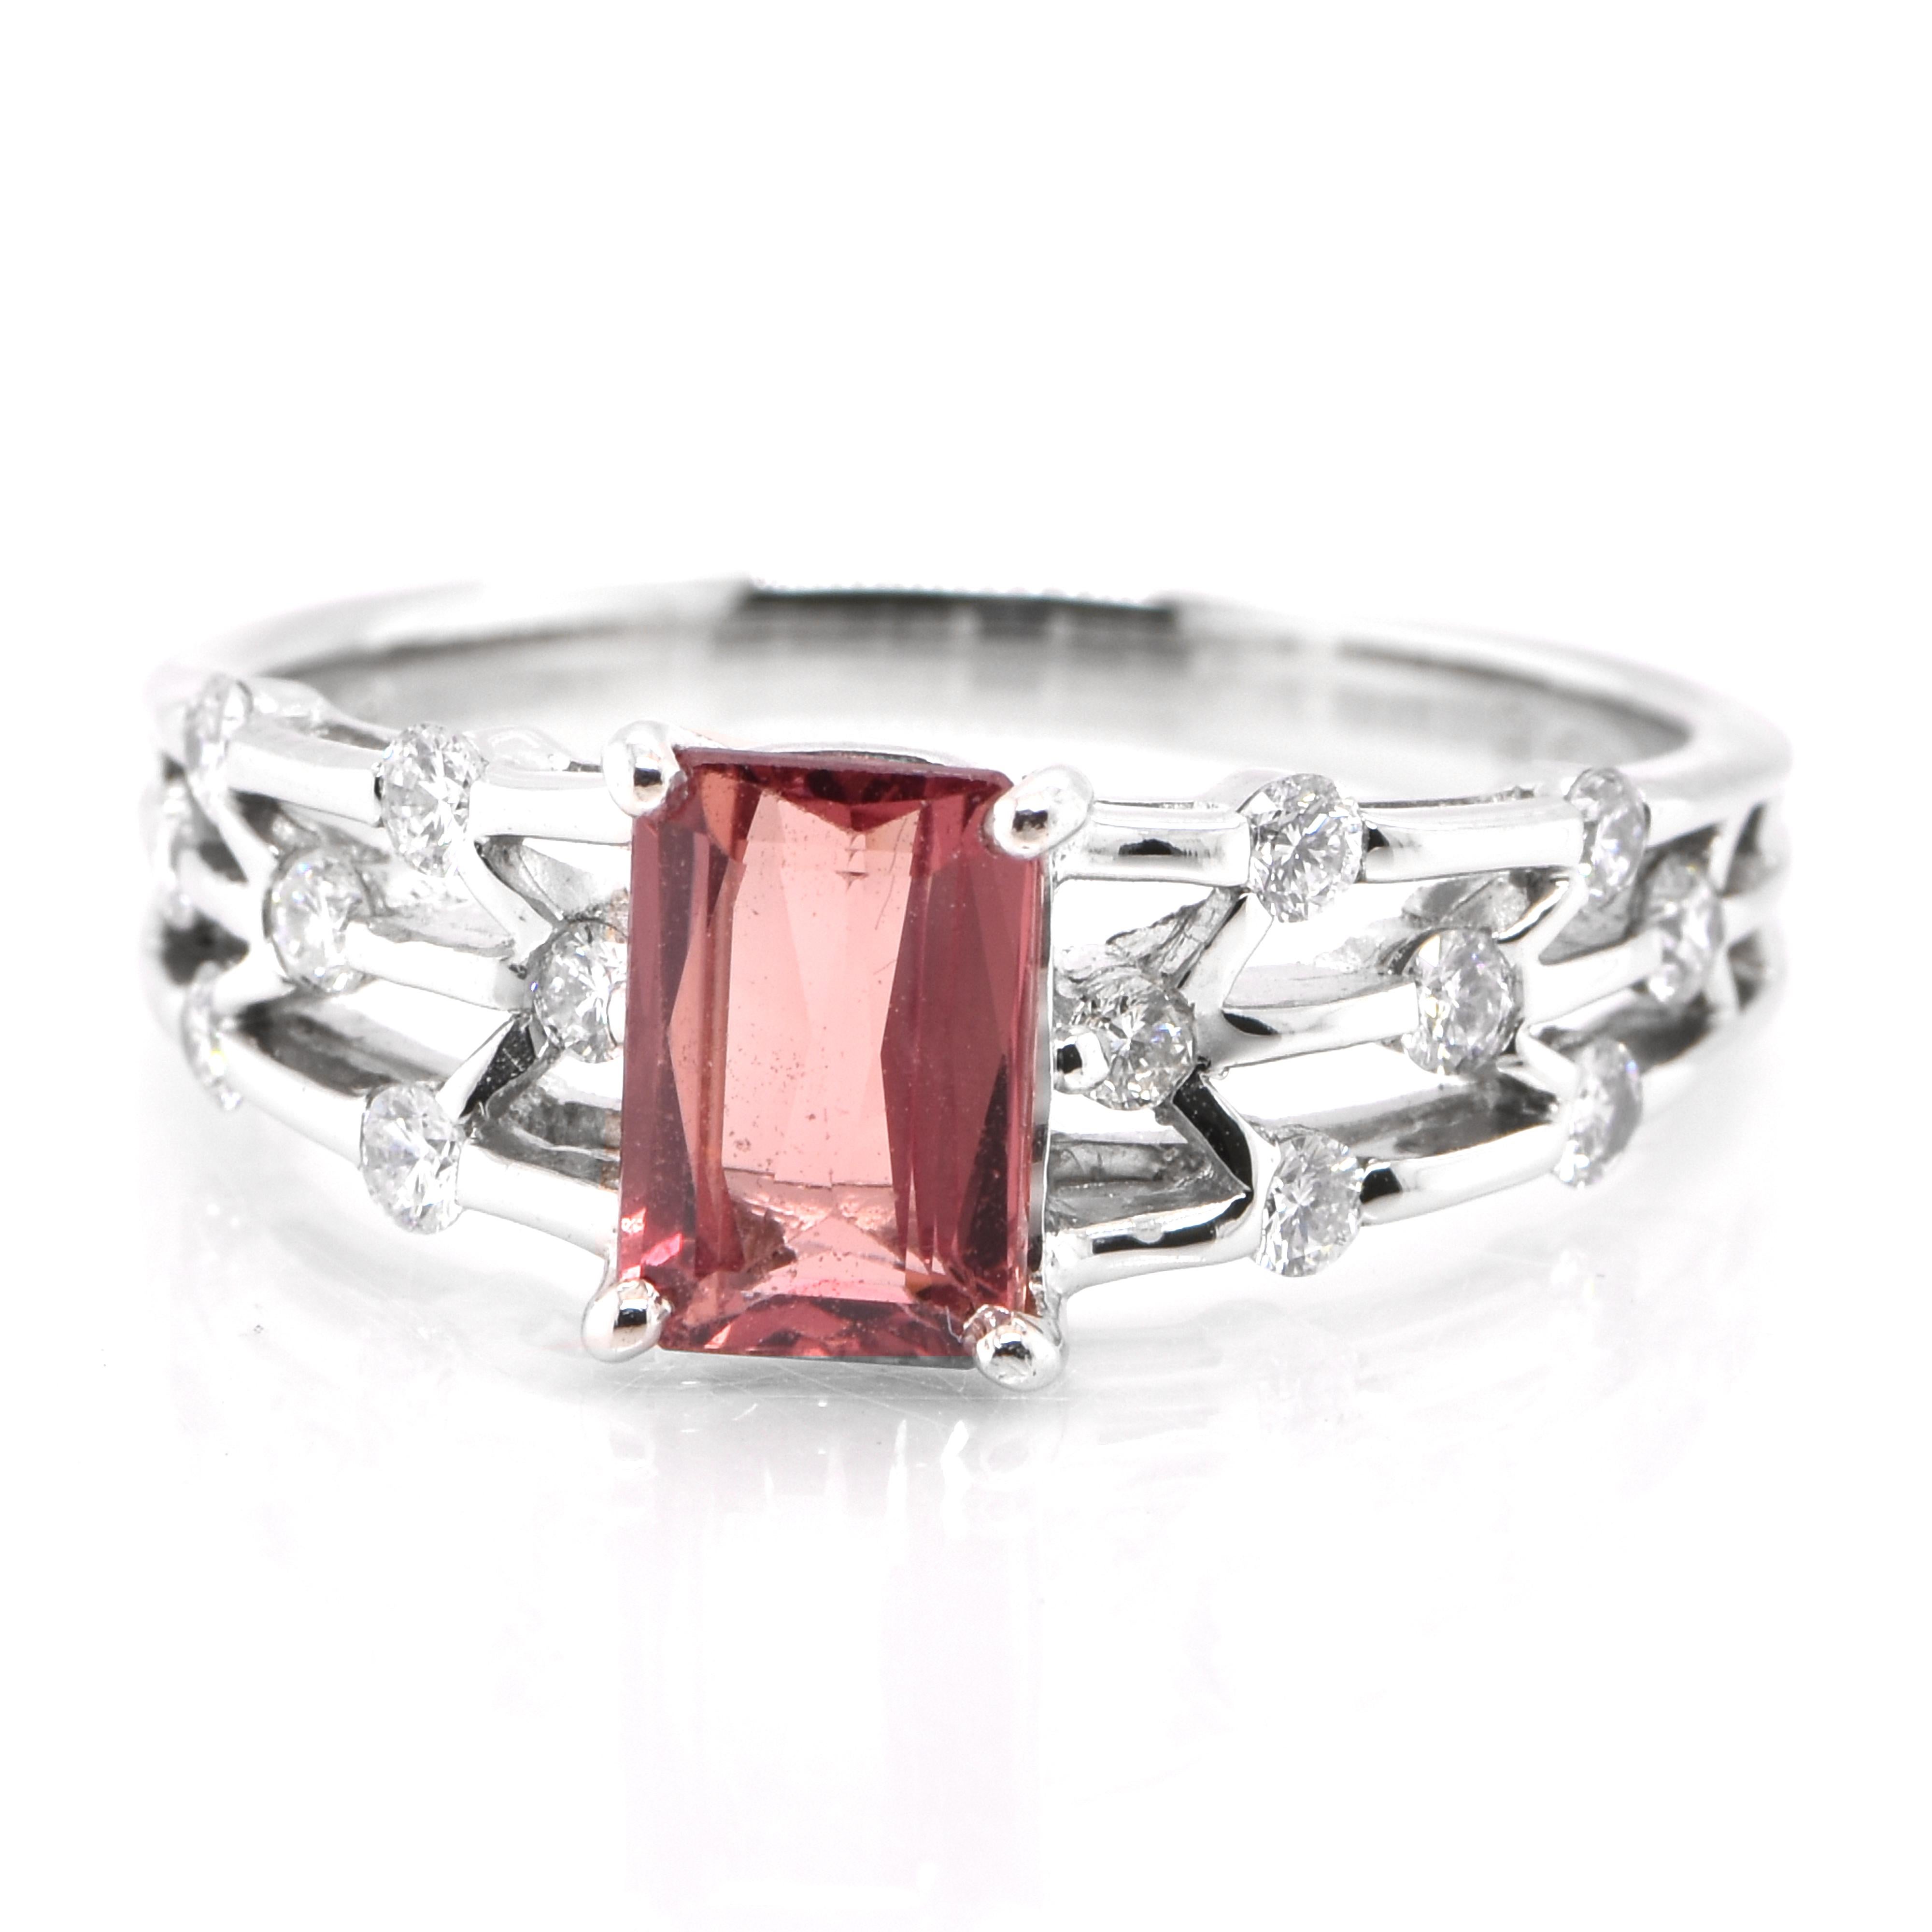 A beautiful ring featuring a CGL Certified 1.35 Carat, Natural Padparadscha Sapphire and 0.36 Carats of Diamond Accents set in Platinum. Sapphires have extraordinary durability - they excel in hardness as well as toughness and durability making them